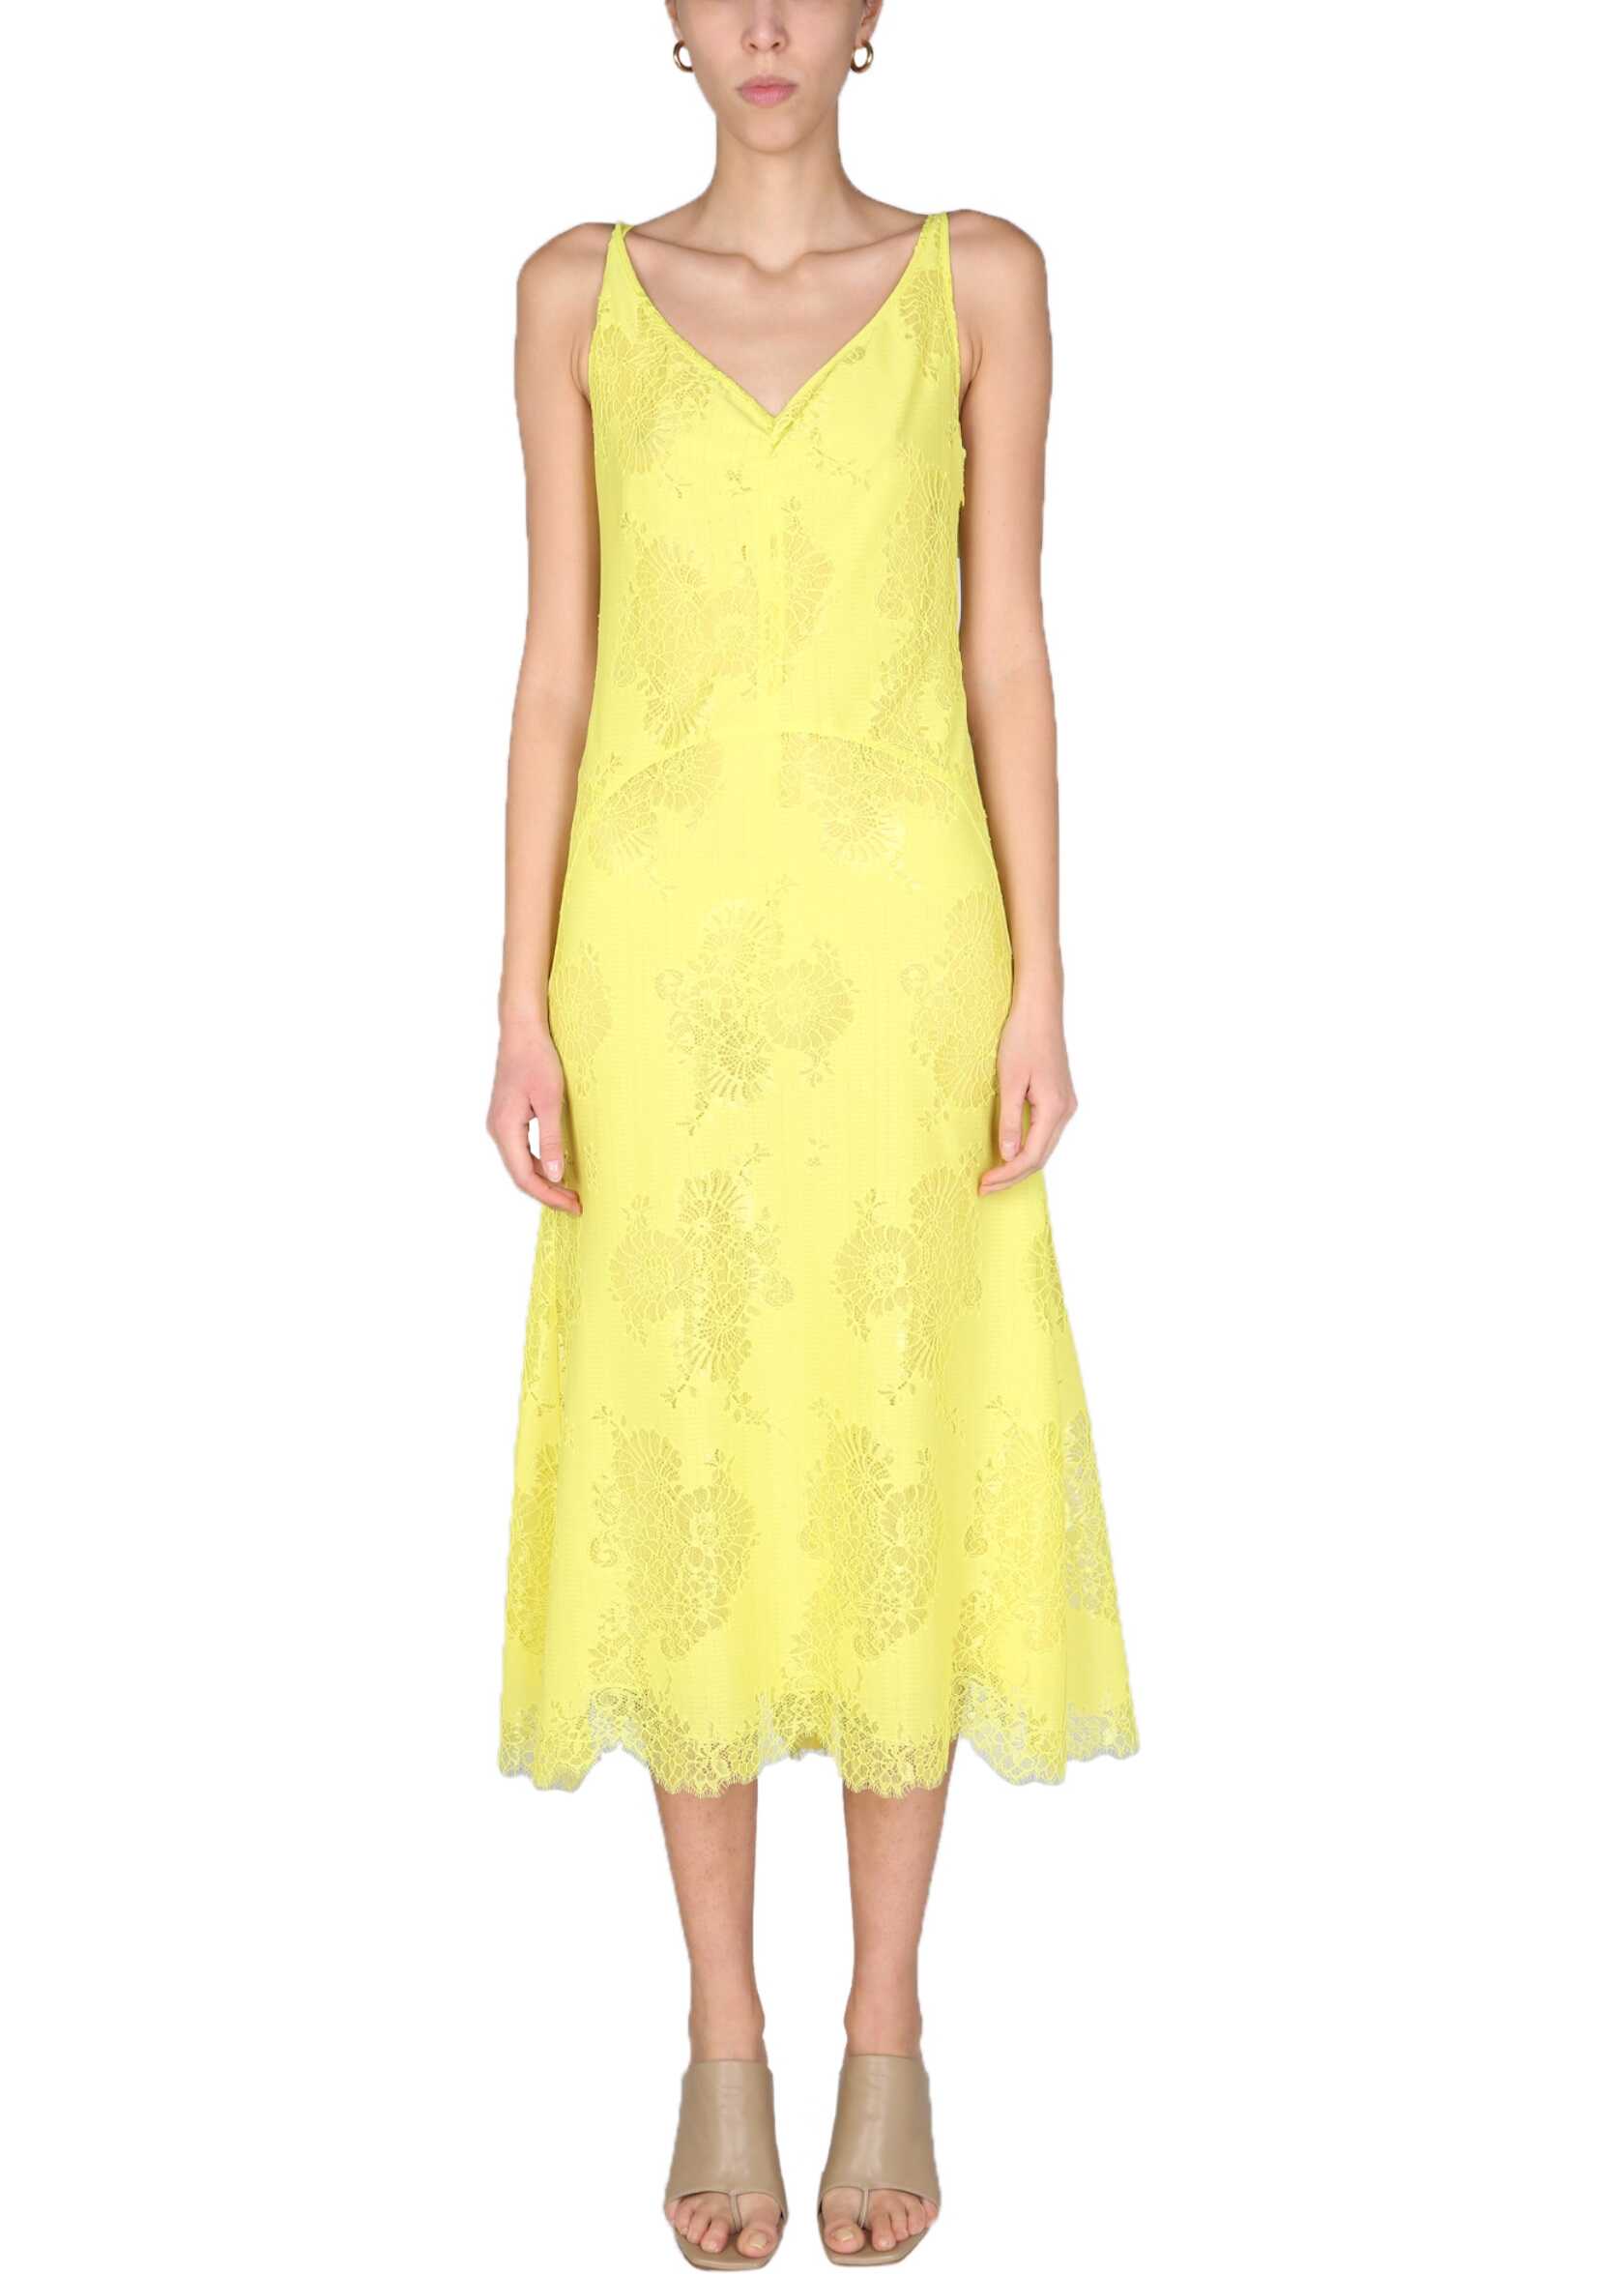 Anna Molinari Dress With Floral Details 7A095A_N0229 YELLOW